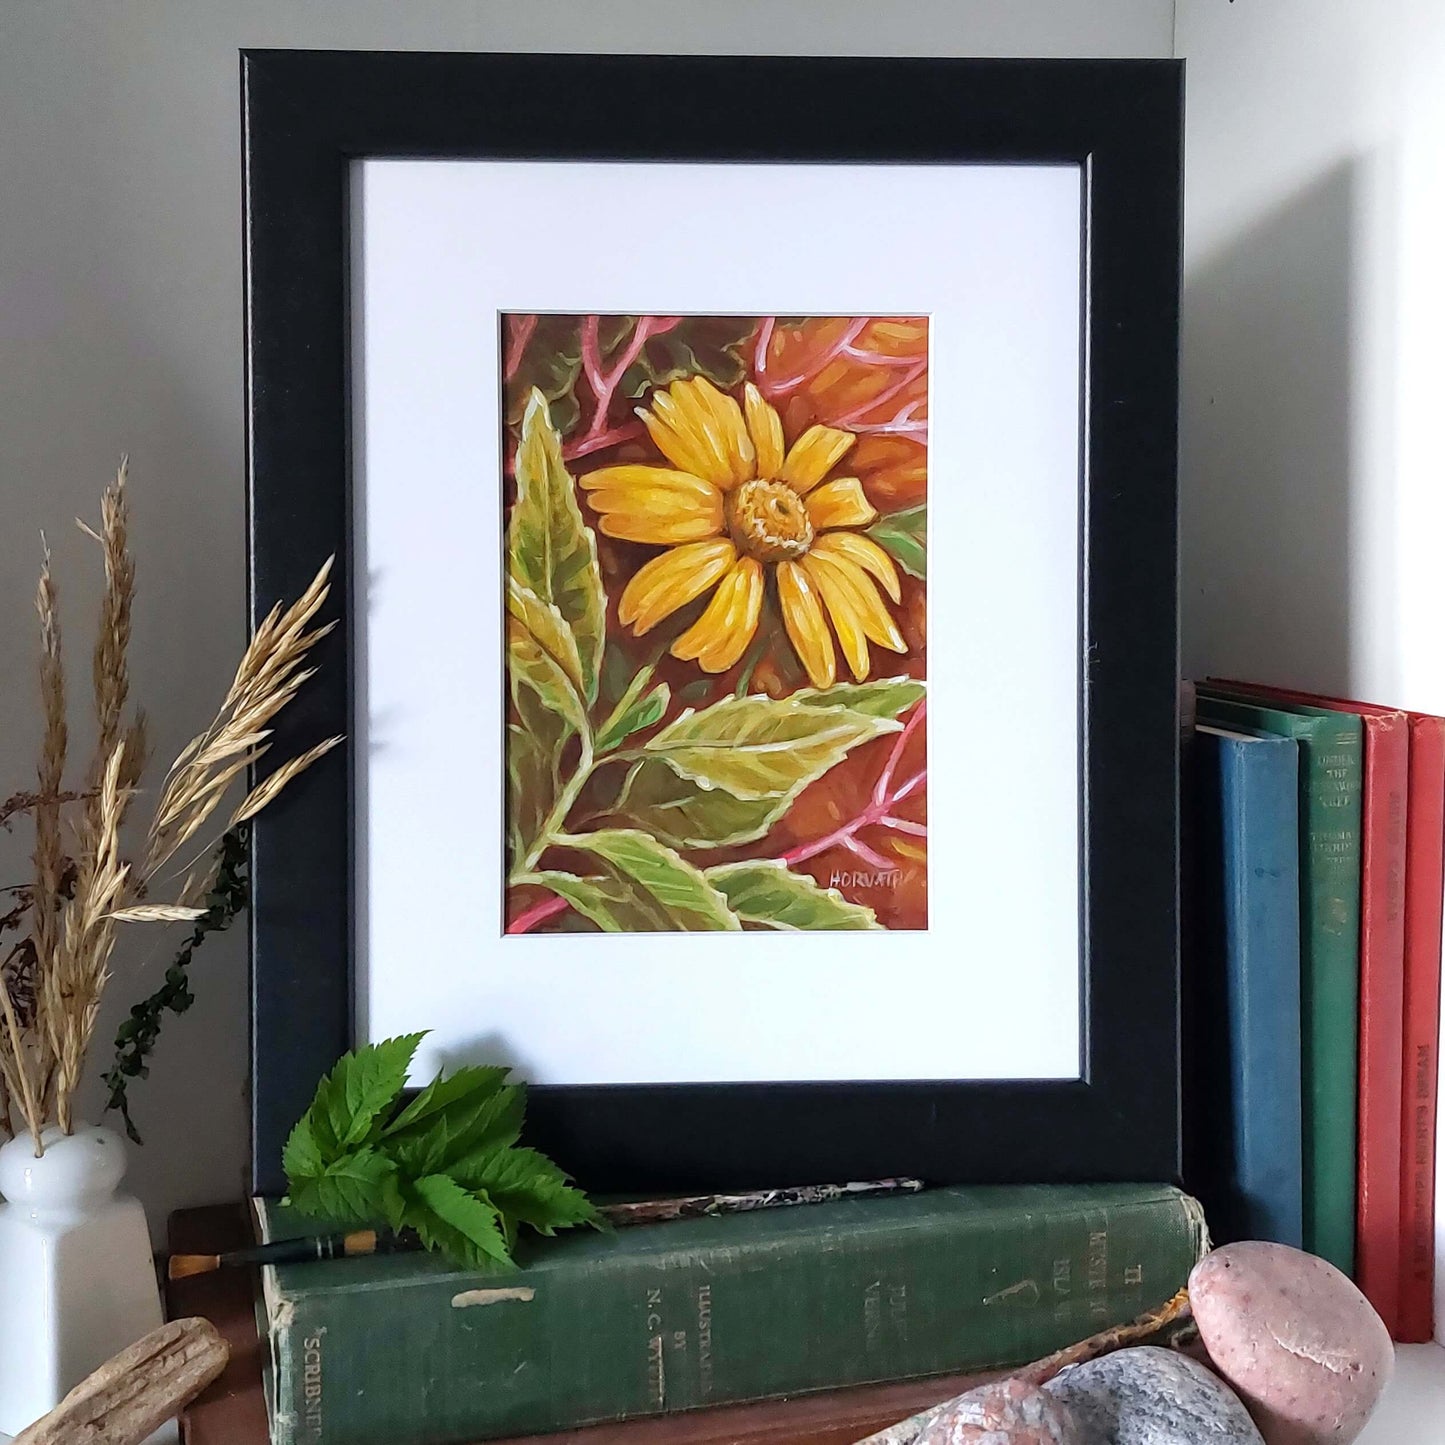 Mini Sunflower Original Painting on Paper framed by artist Cathy Horvath Buchanan